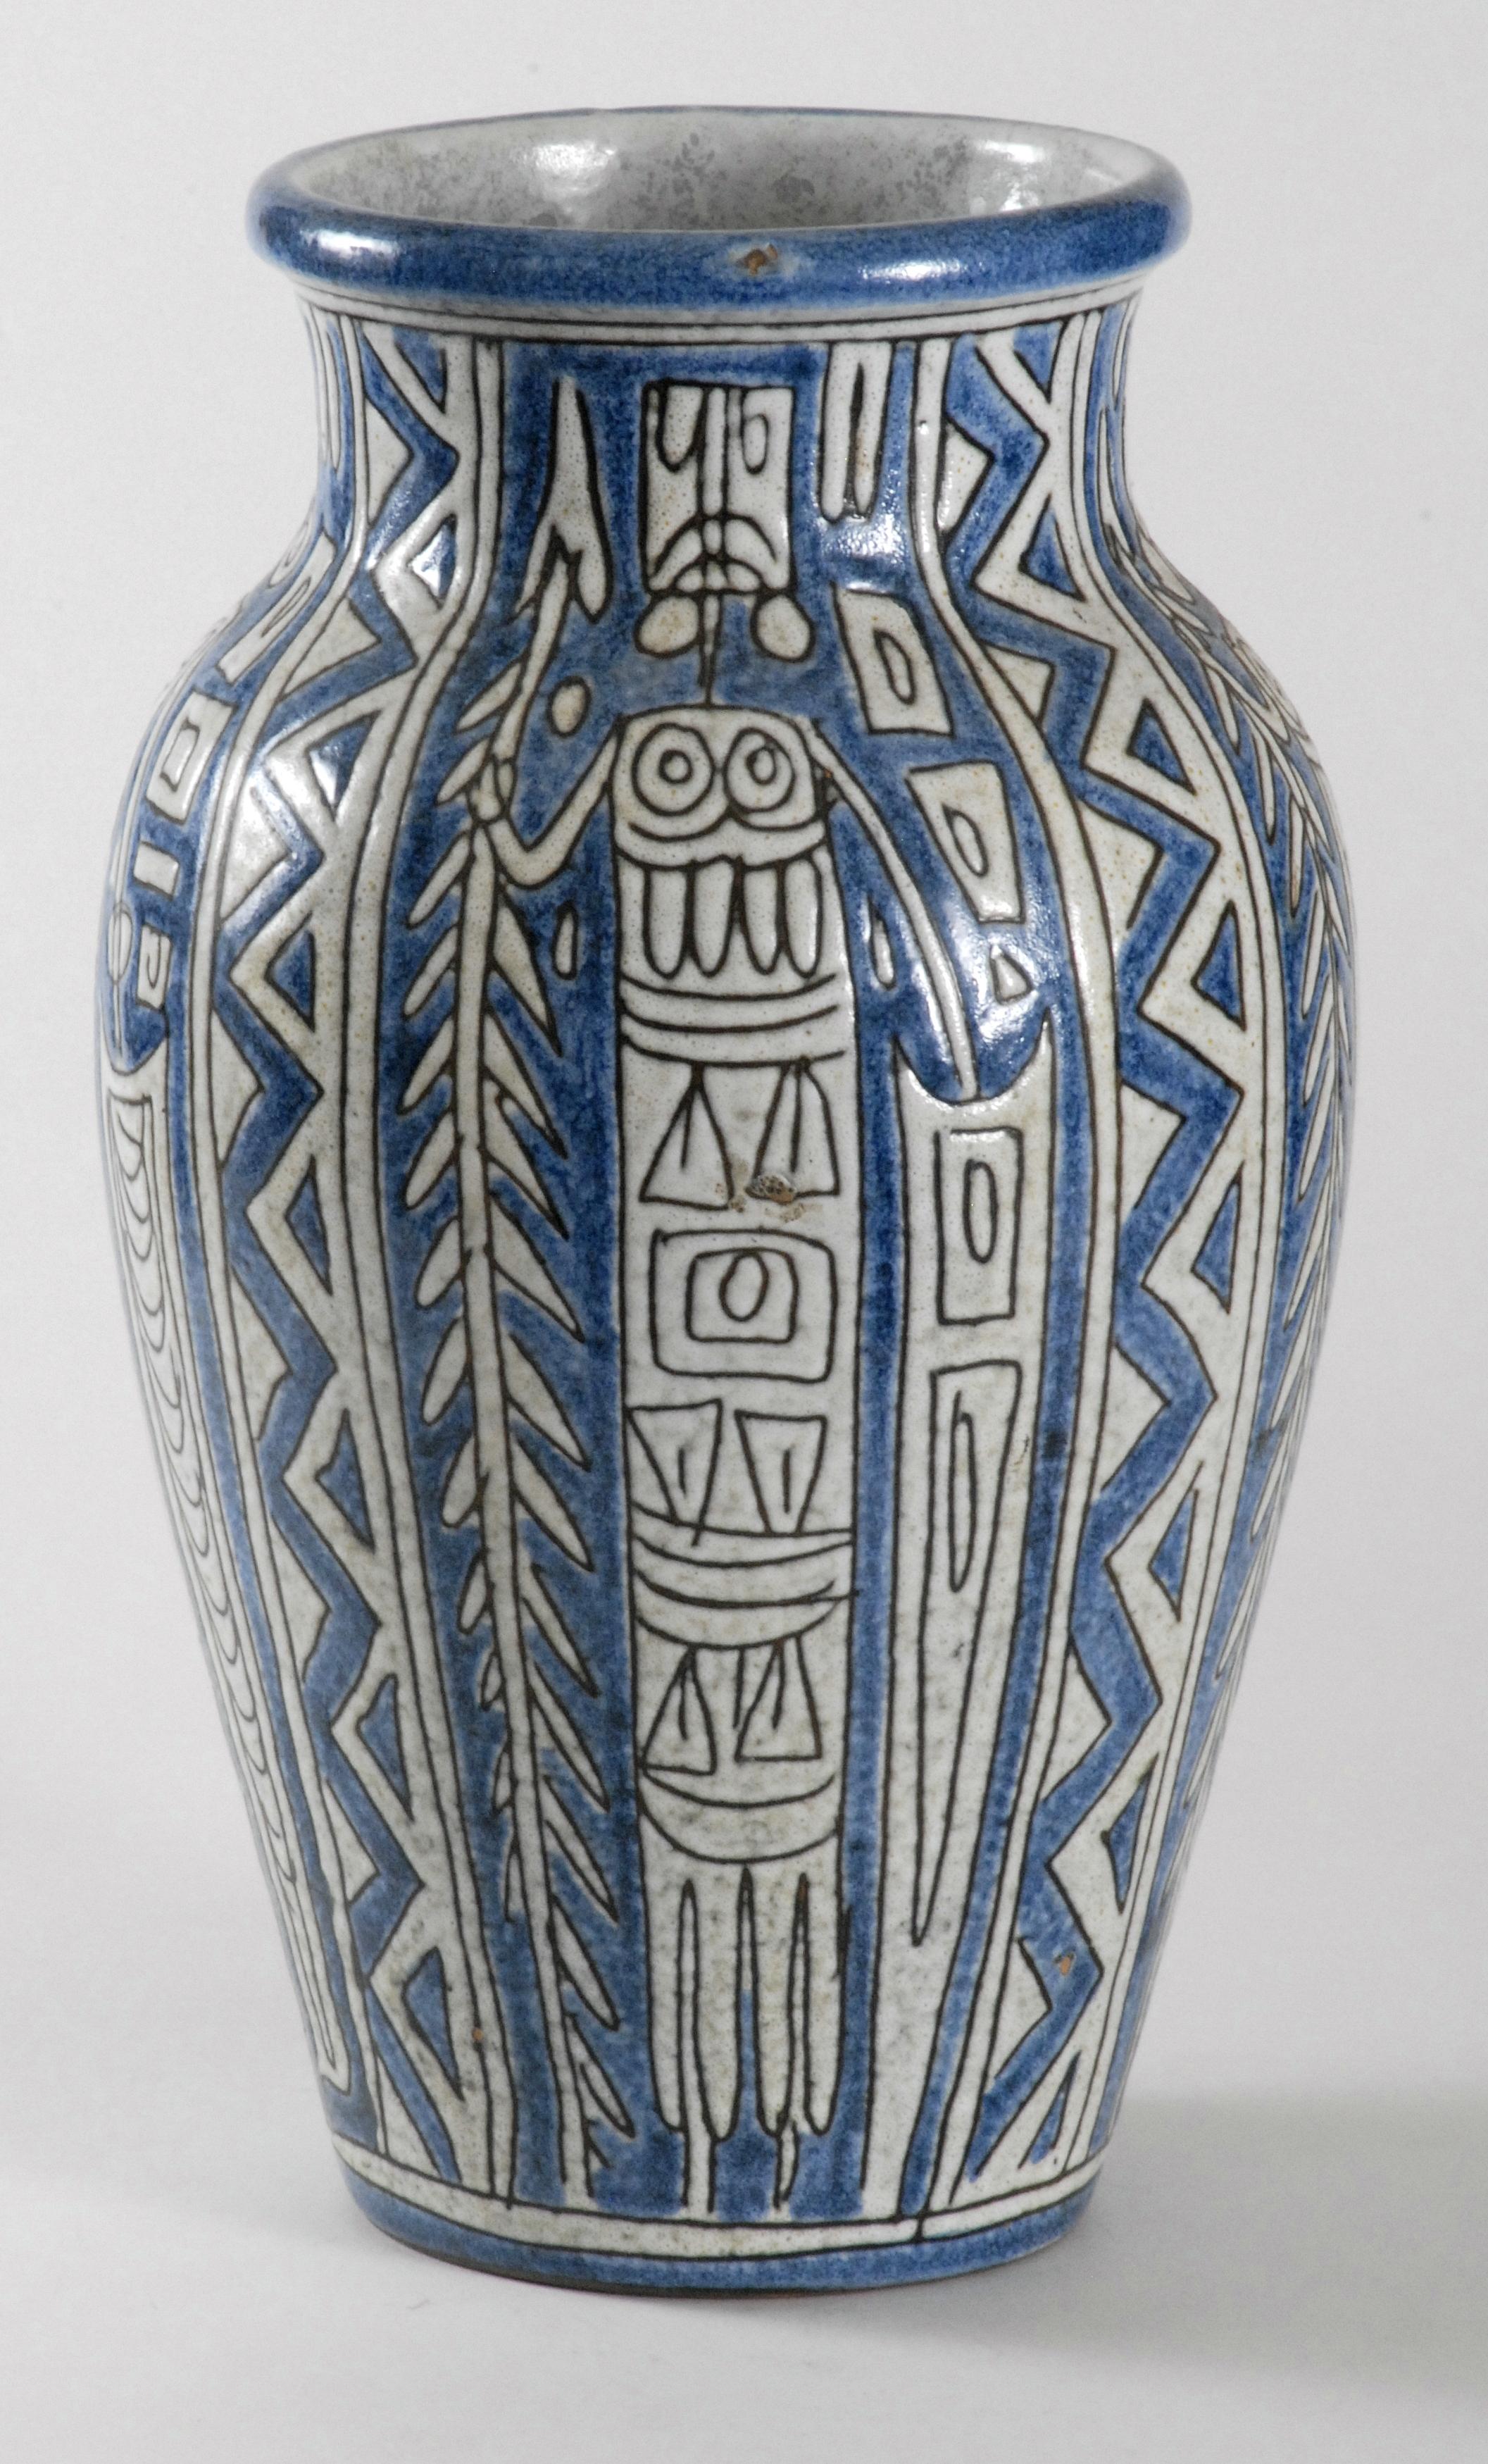 A large Fratelli vase decorated with creamy glaze 'Tribal' figures on a blue glaze background. Beautifully detailed with all the figures being different. The glaze is semi matte and very tactile.